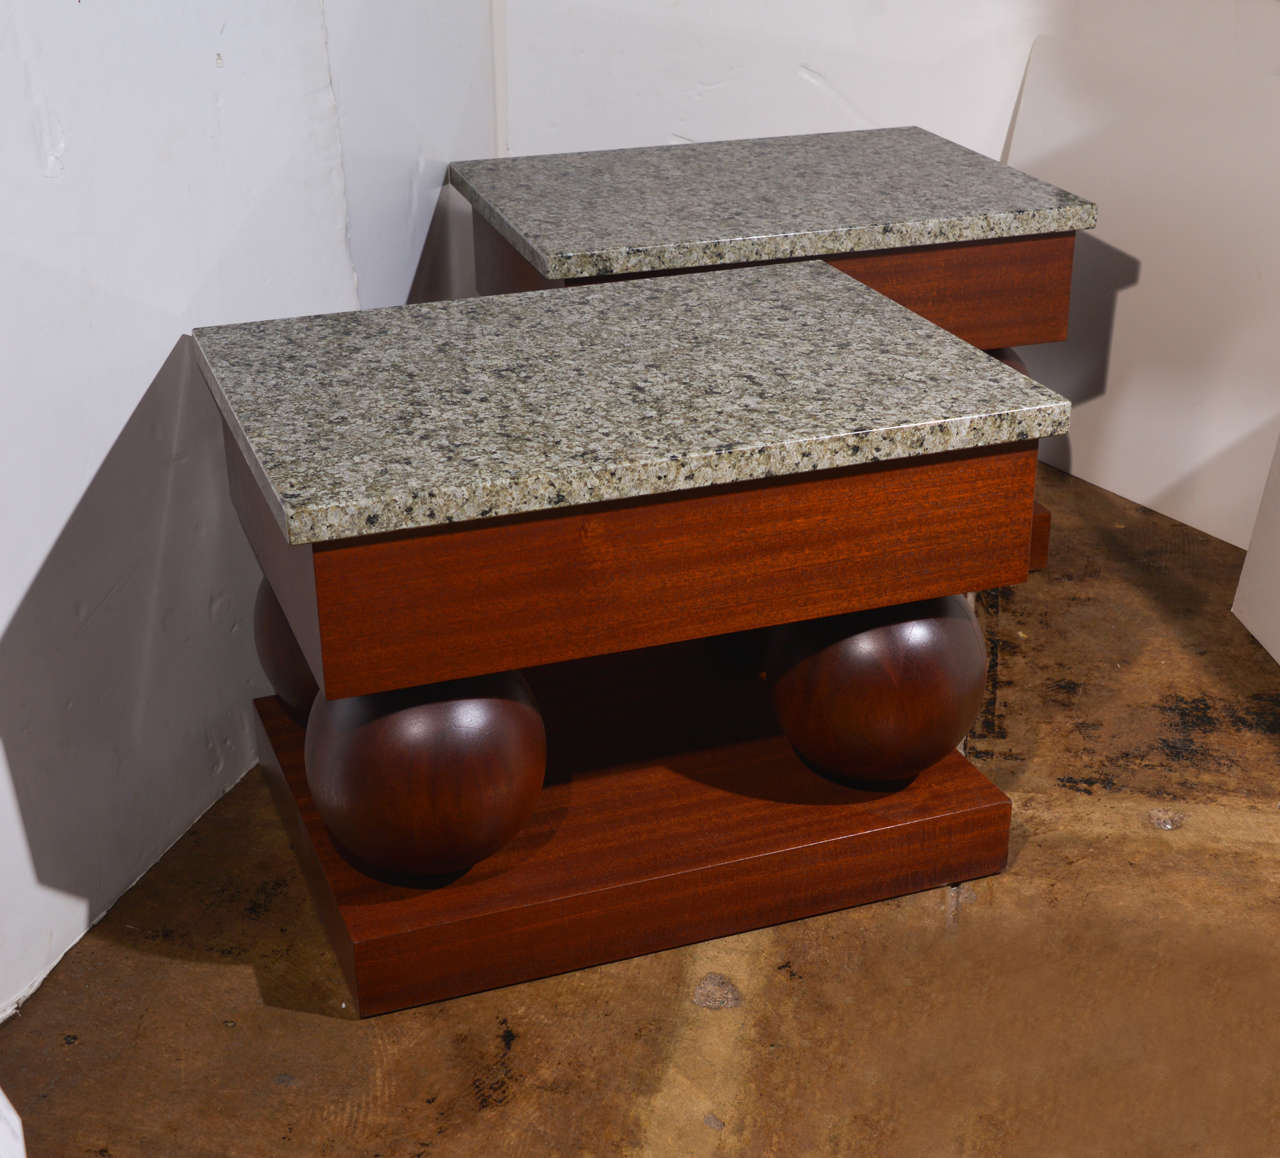 Matched original pair modern end tables.
Original mahogany veneer with 4 solid mahogany laminated ball supports.  
New removable seafoam green flat-polished granite tops.
Built like tanks

PRICED PER PAIR.